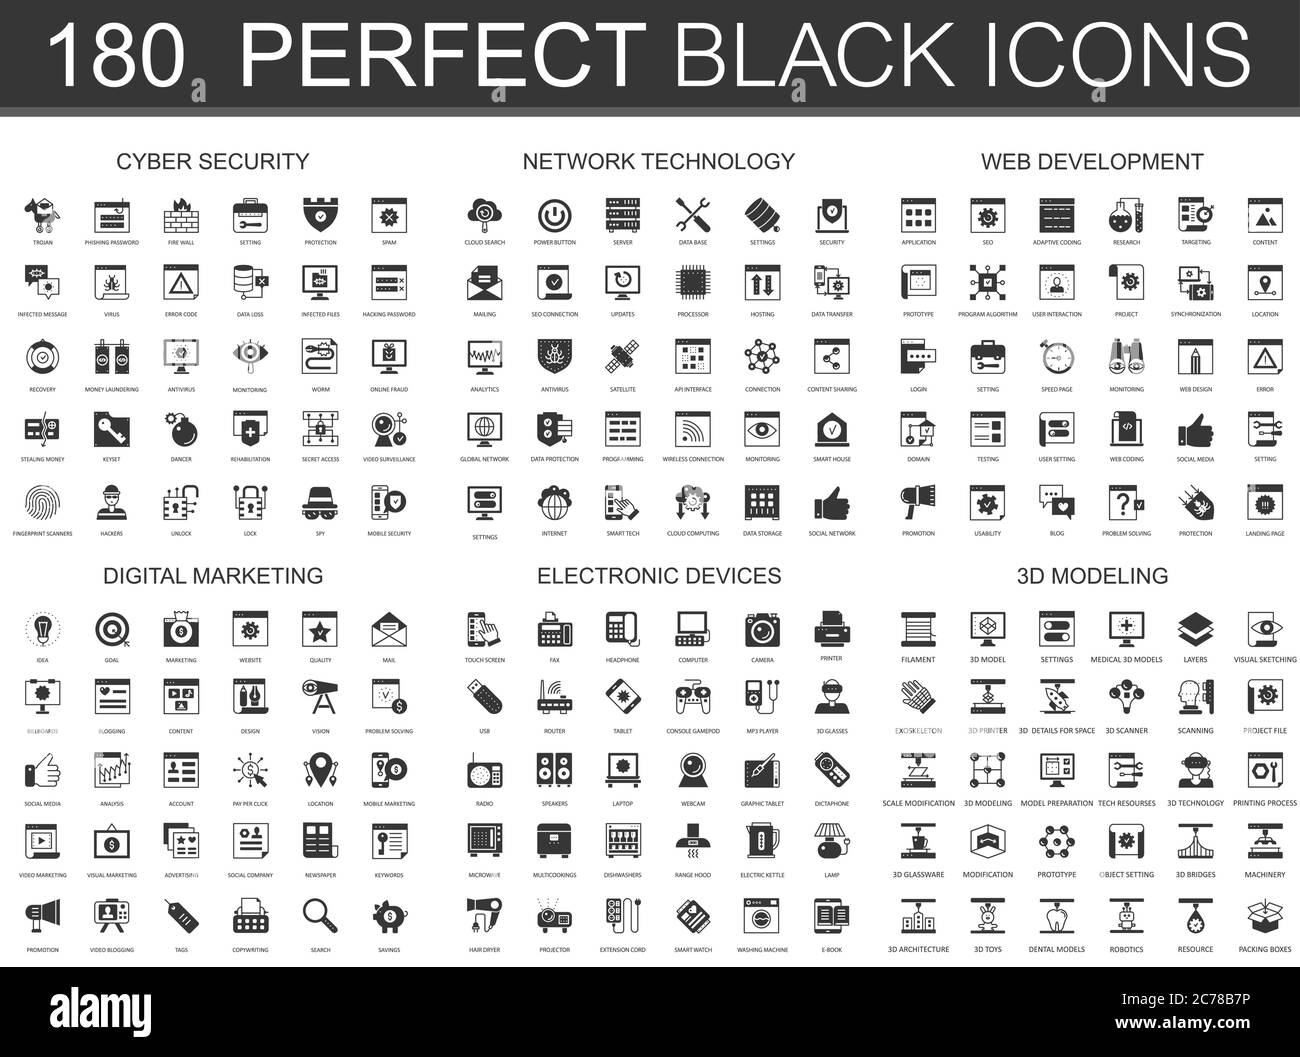 Cyber security, network technology, web development, digital marketing, electronic devices, 3d modeling icons black mini icons concept symbols. Modern vector icon pictogram Stock Vector